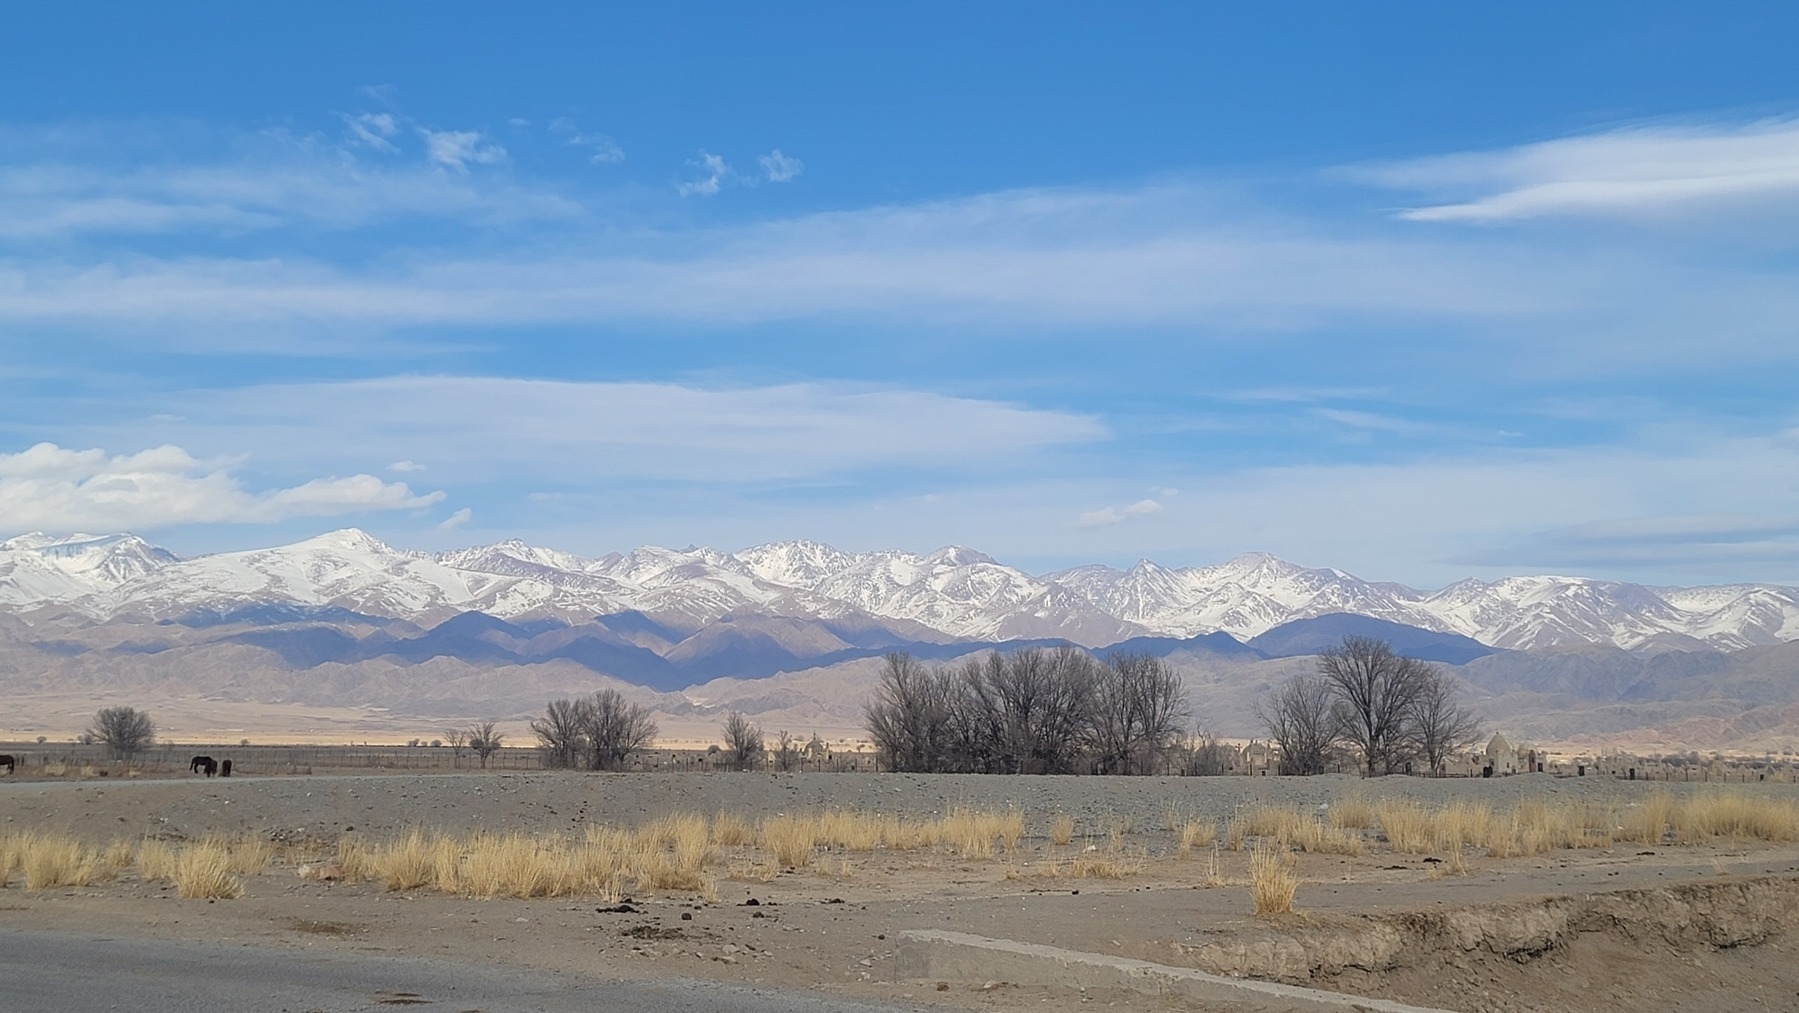 snow-capped mountains with long, dark shadows from thin overhead clouds streaking across; a few brown trees and yellow grass among a field of mostly dirt